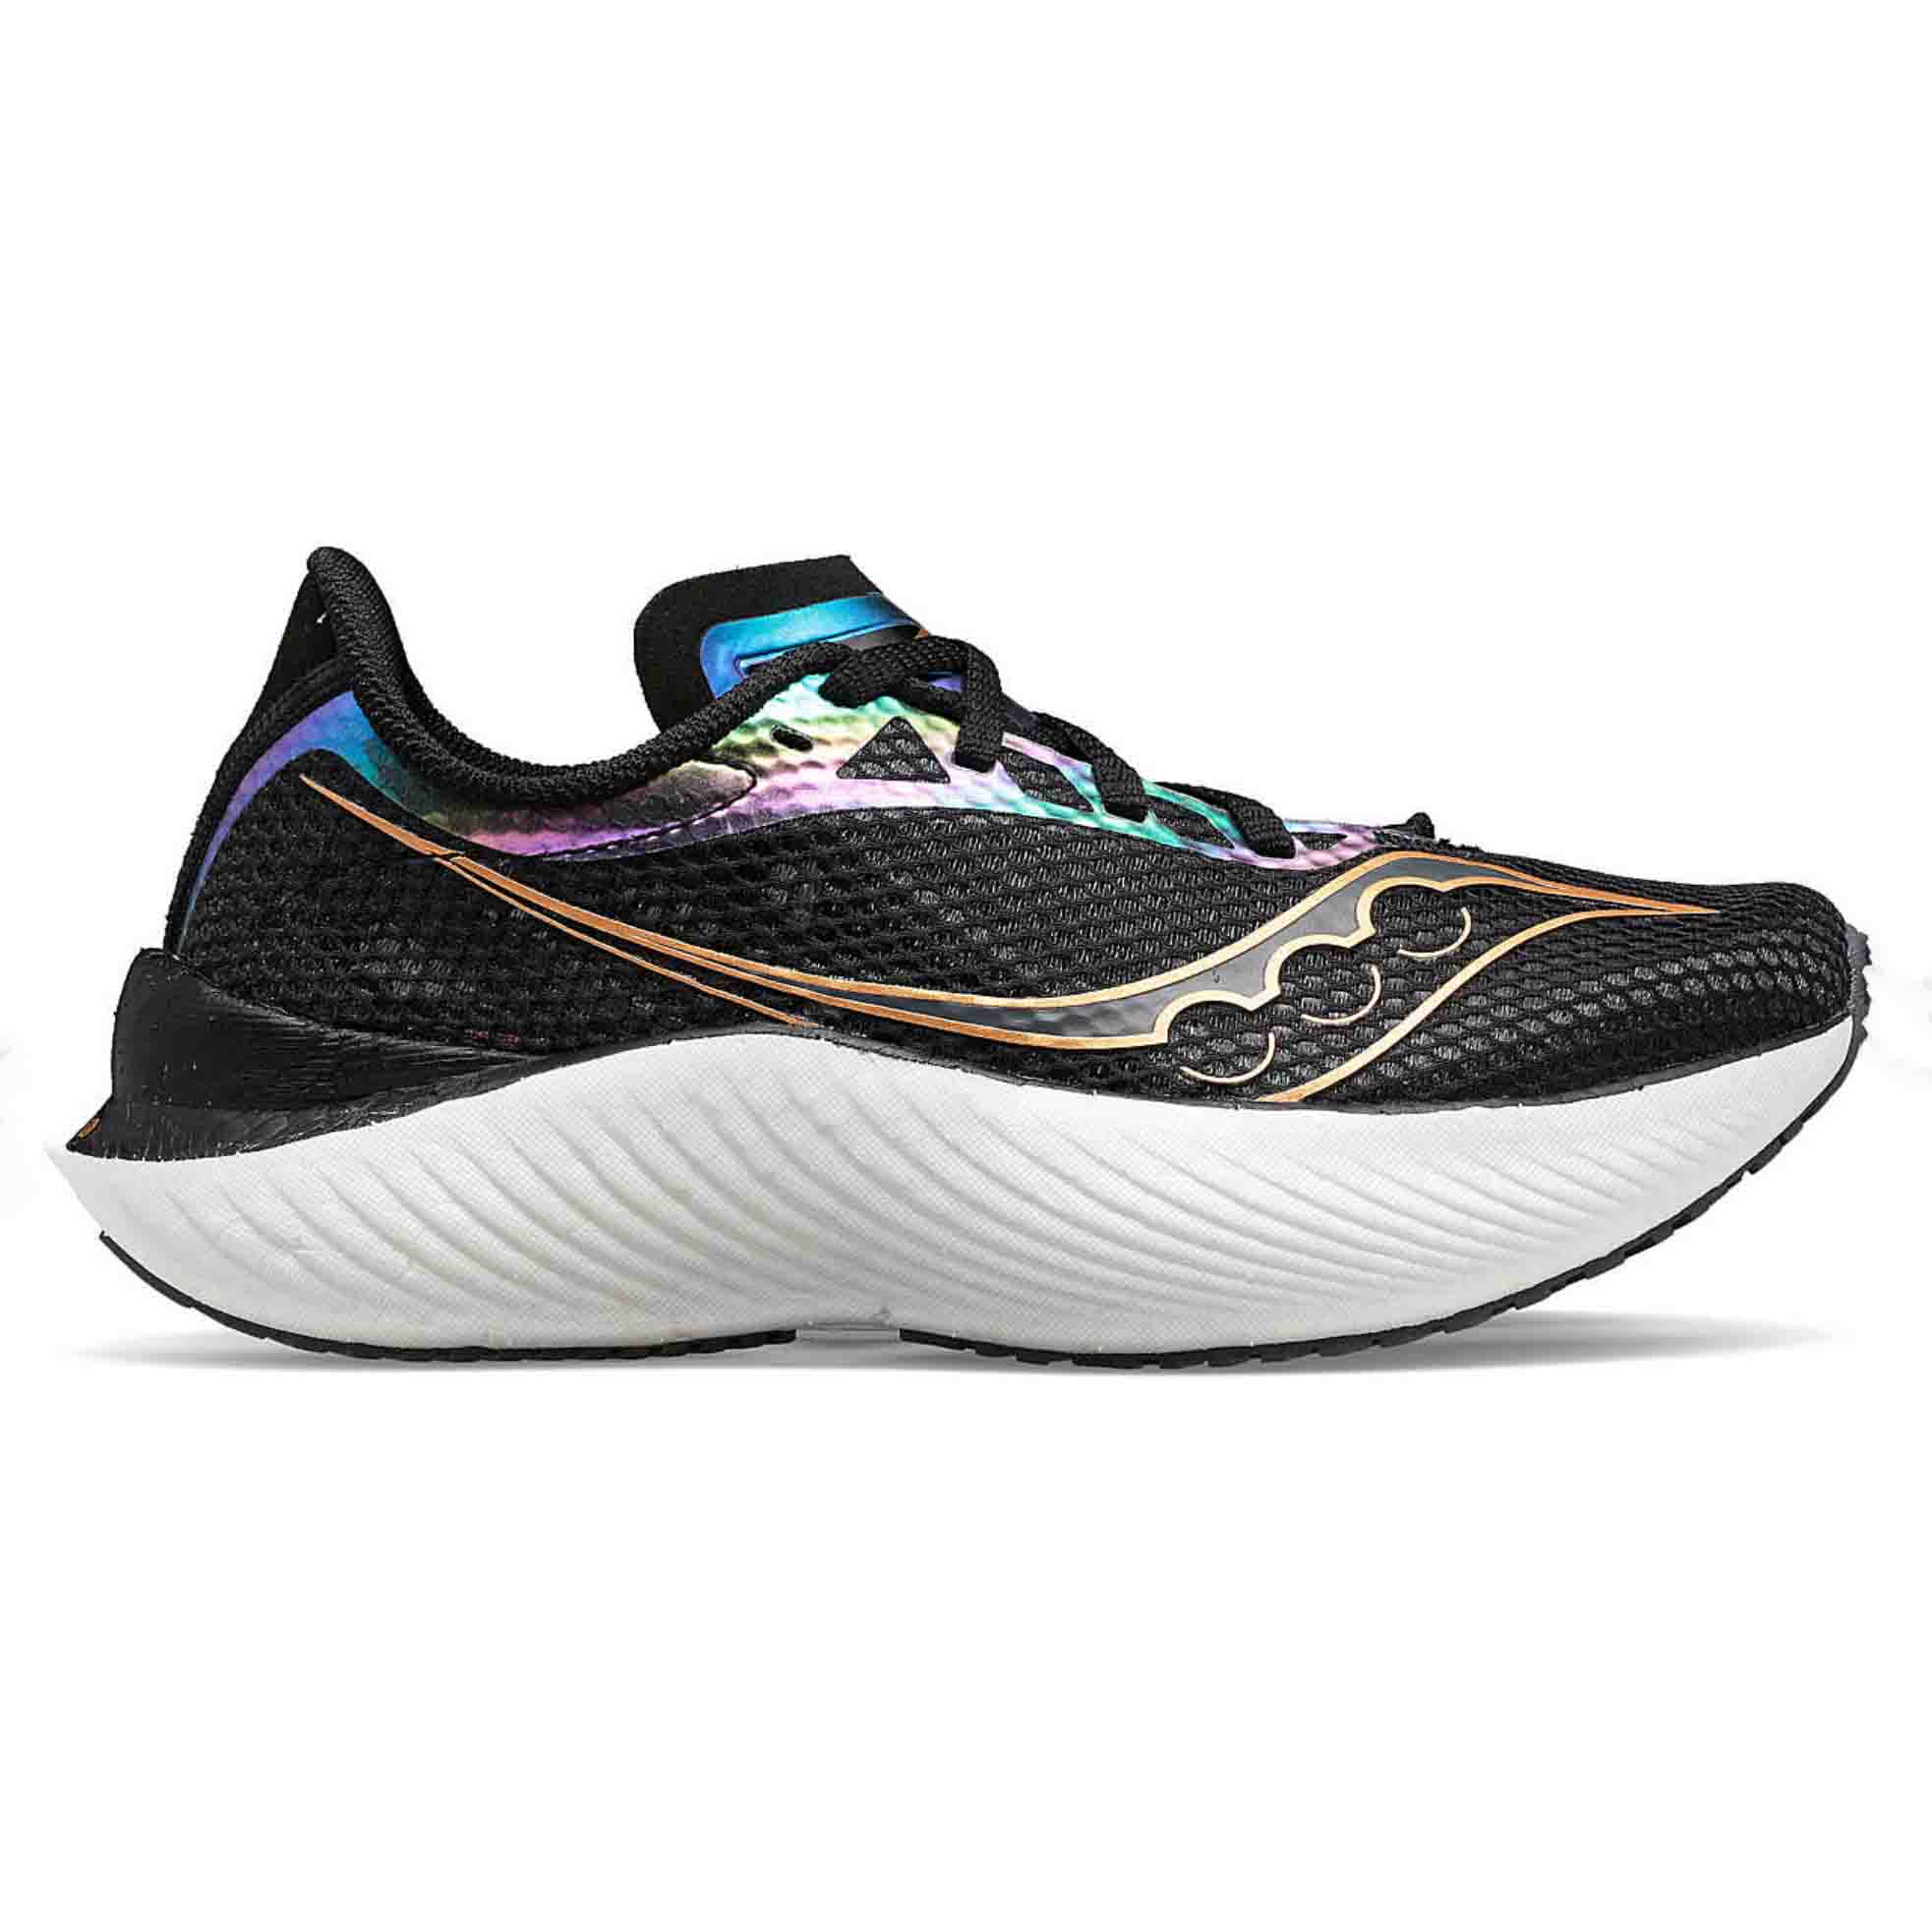 Running shoe in black and hologram colors